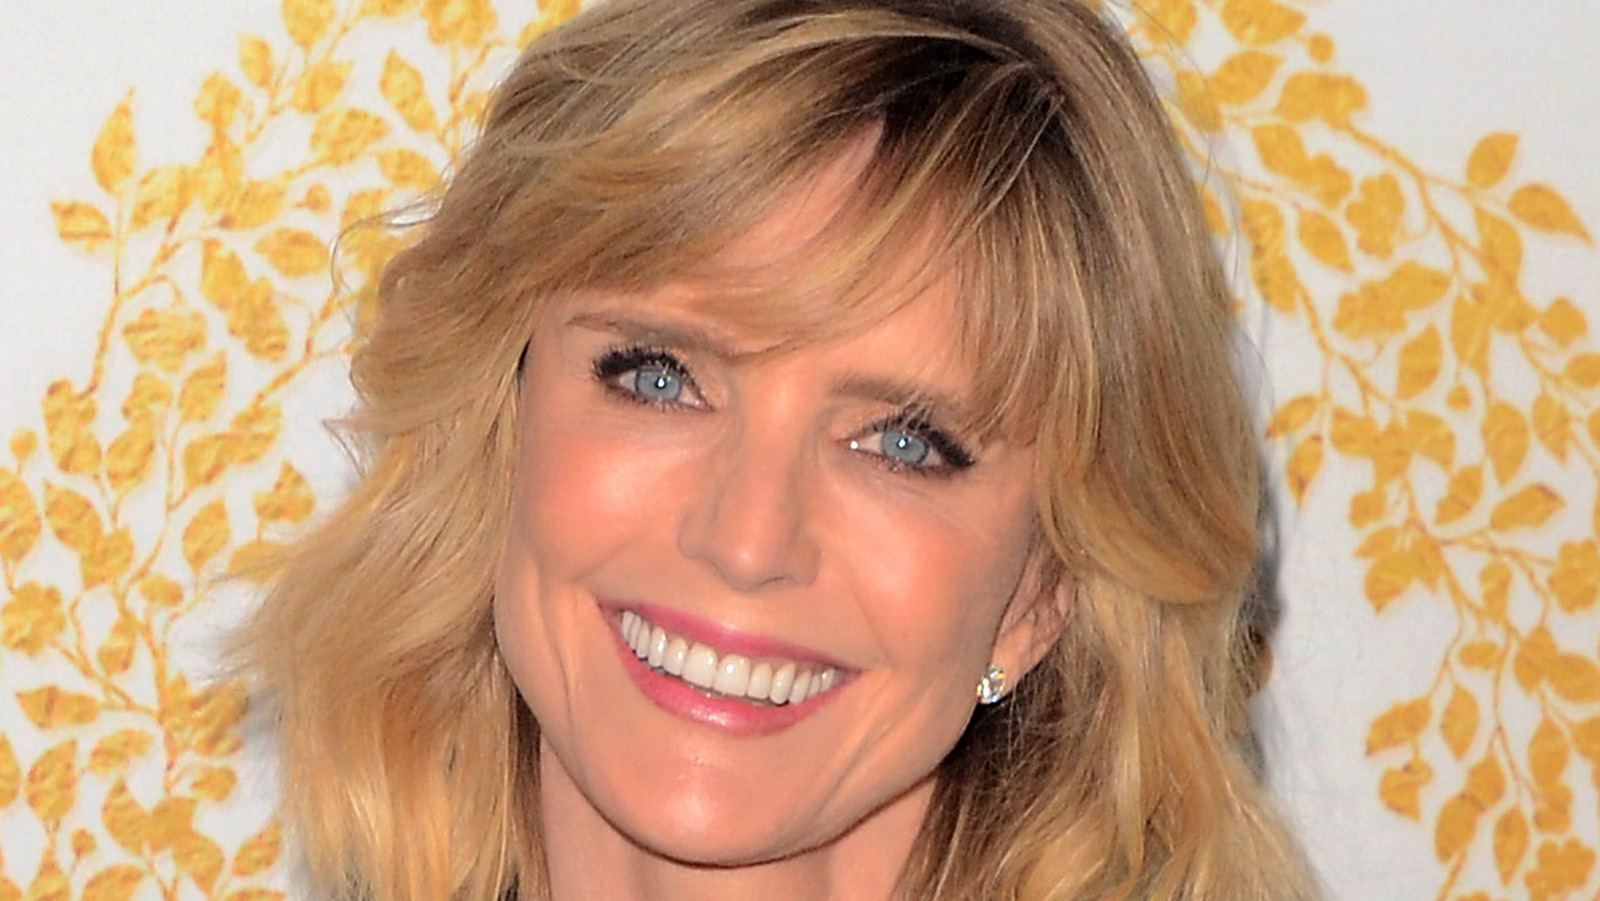 Whatever Happened To Courtney Thorne-Smith?